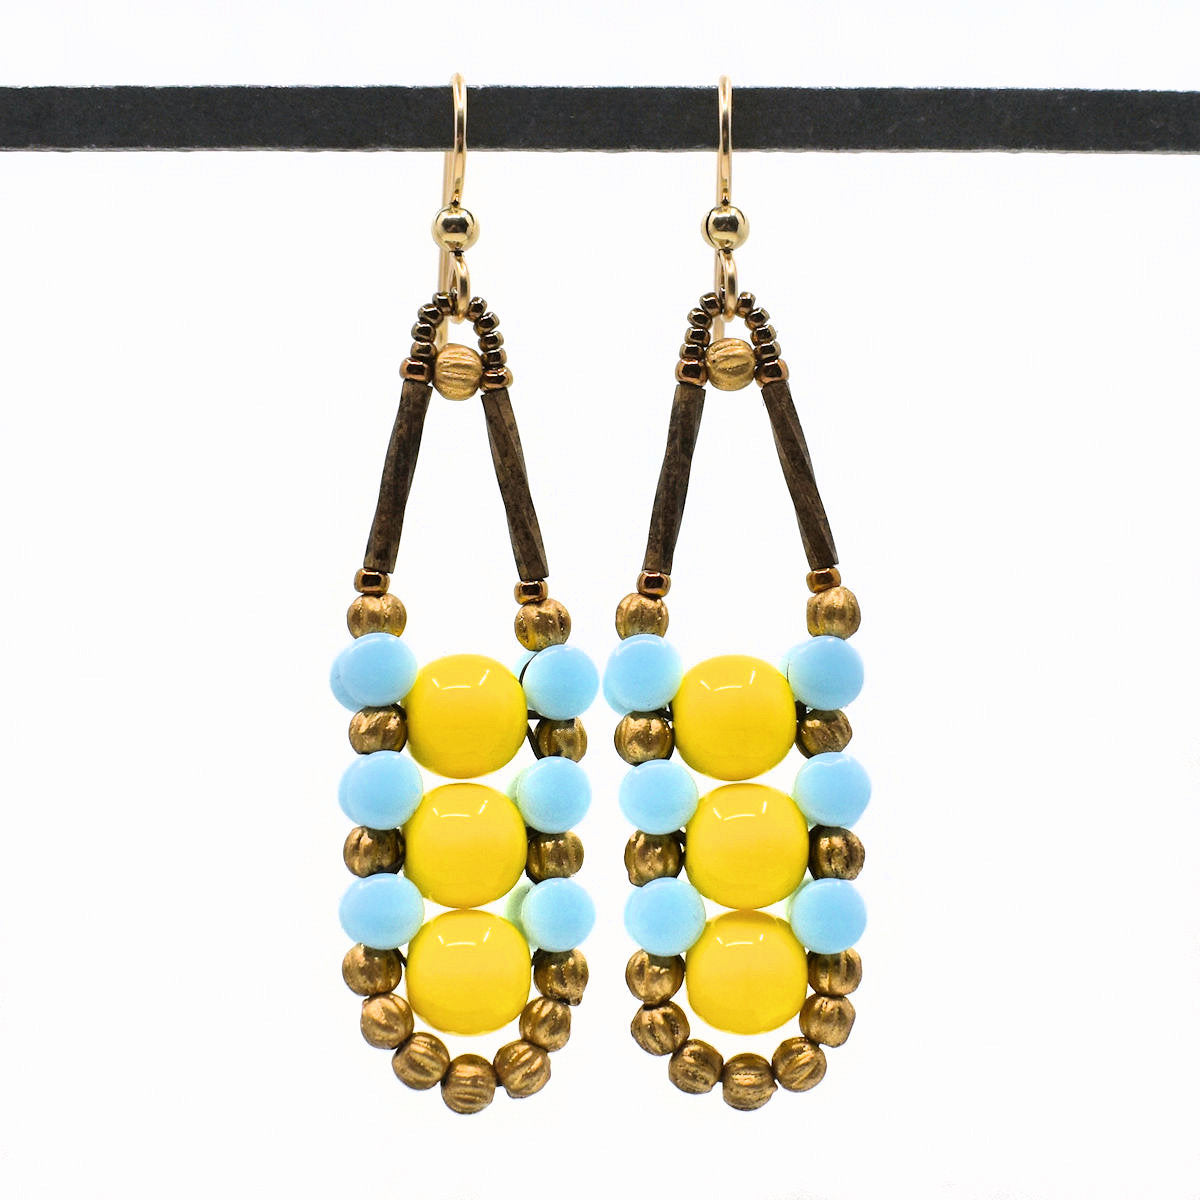 Long bright yellow and light blue earrings with gold accents and ear wires hang from a black bar in front of a white background. These earrings have three bright yellow beads stacked vertically and outlined in an alternating pattern of light blue and gold beads. 